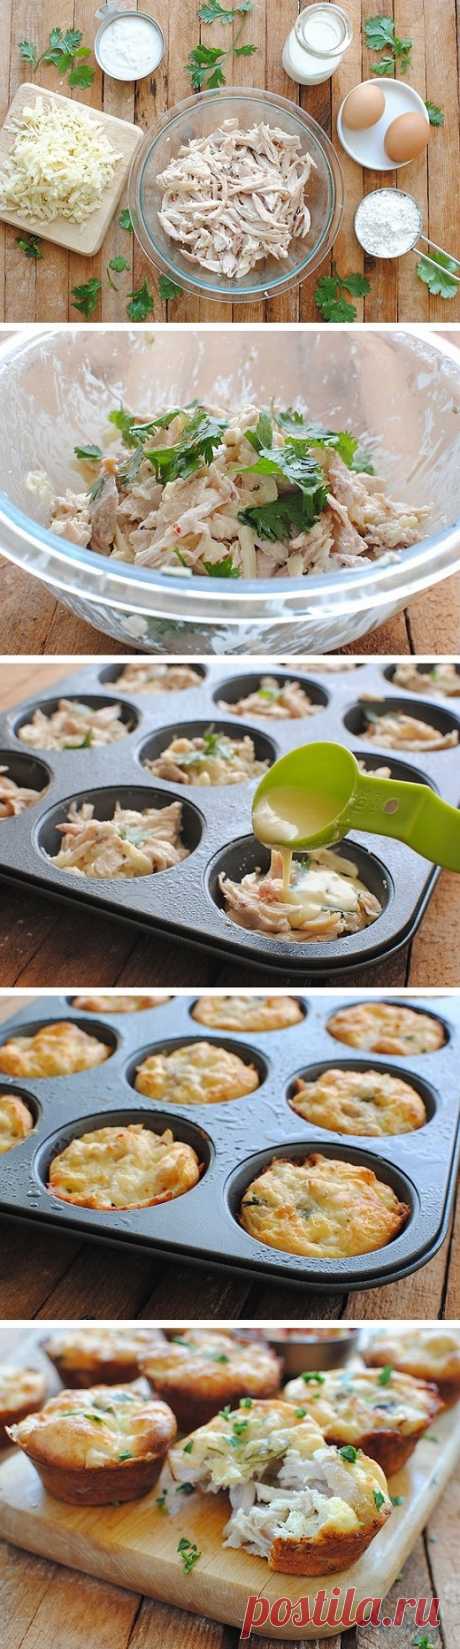 Mini Tex-Mex Chicken and Cheese Pies | ChocoBerry